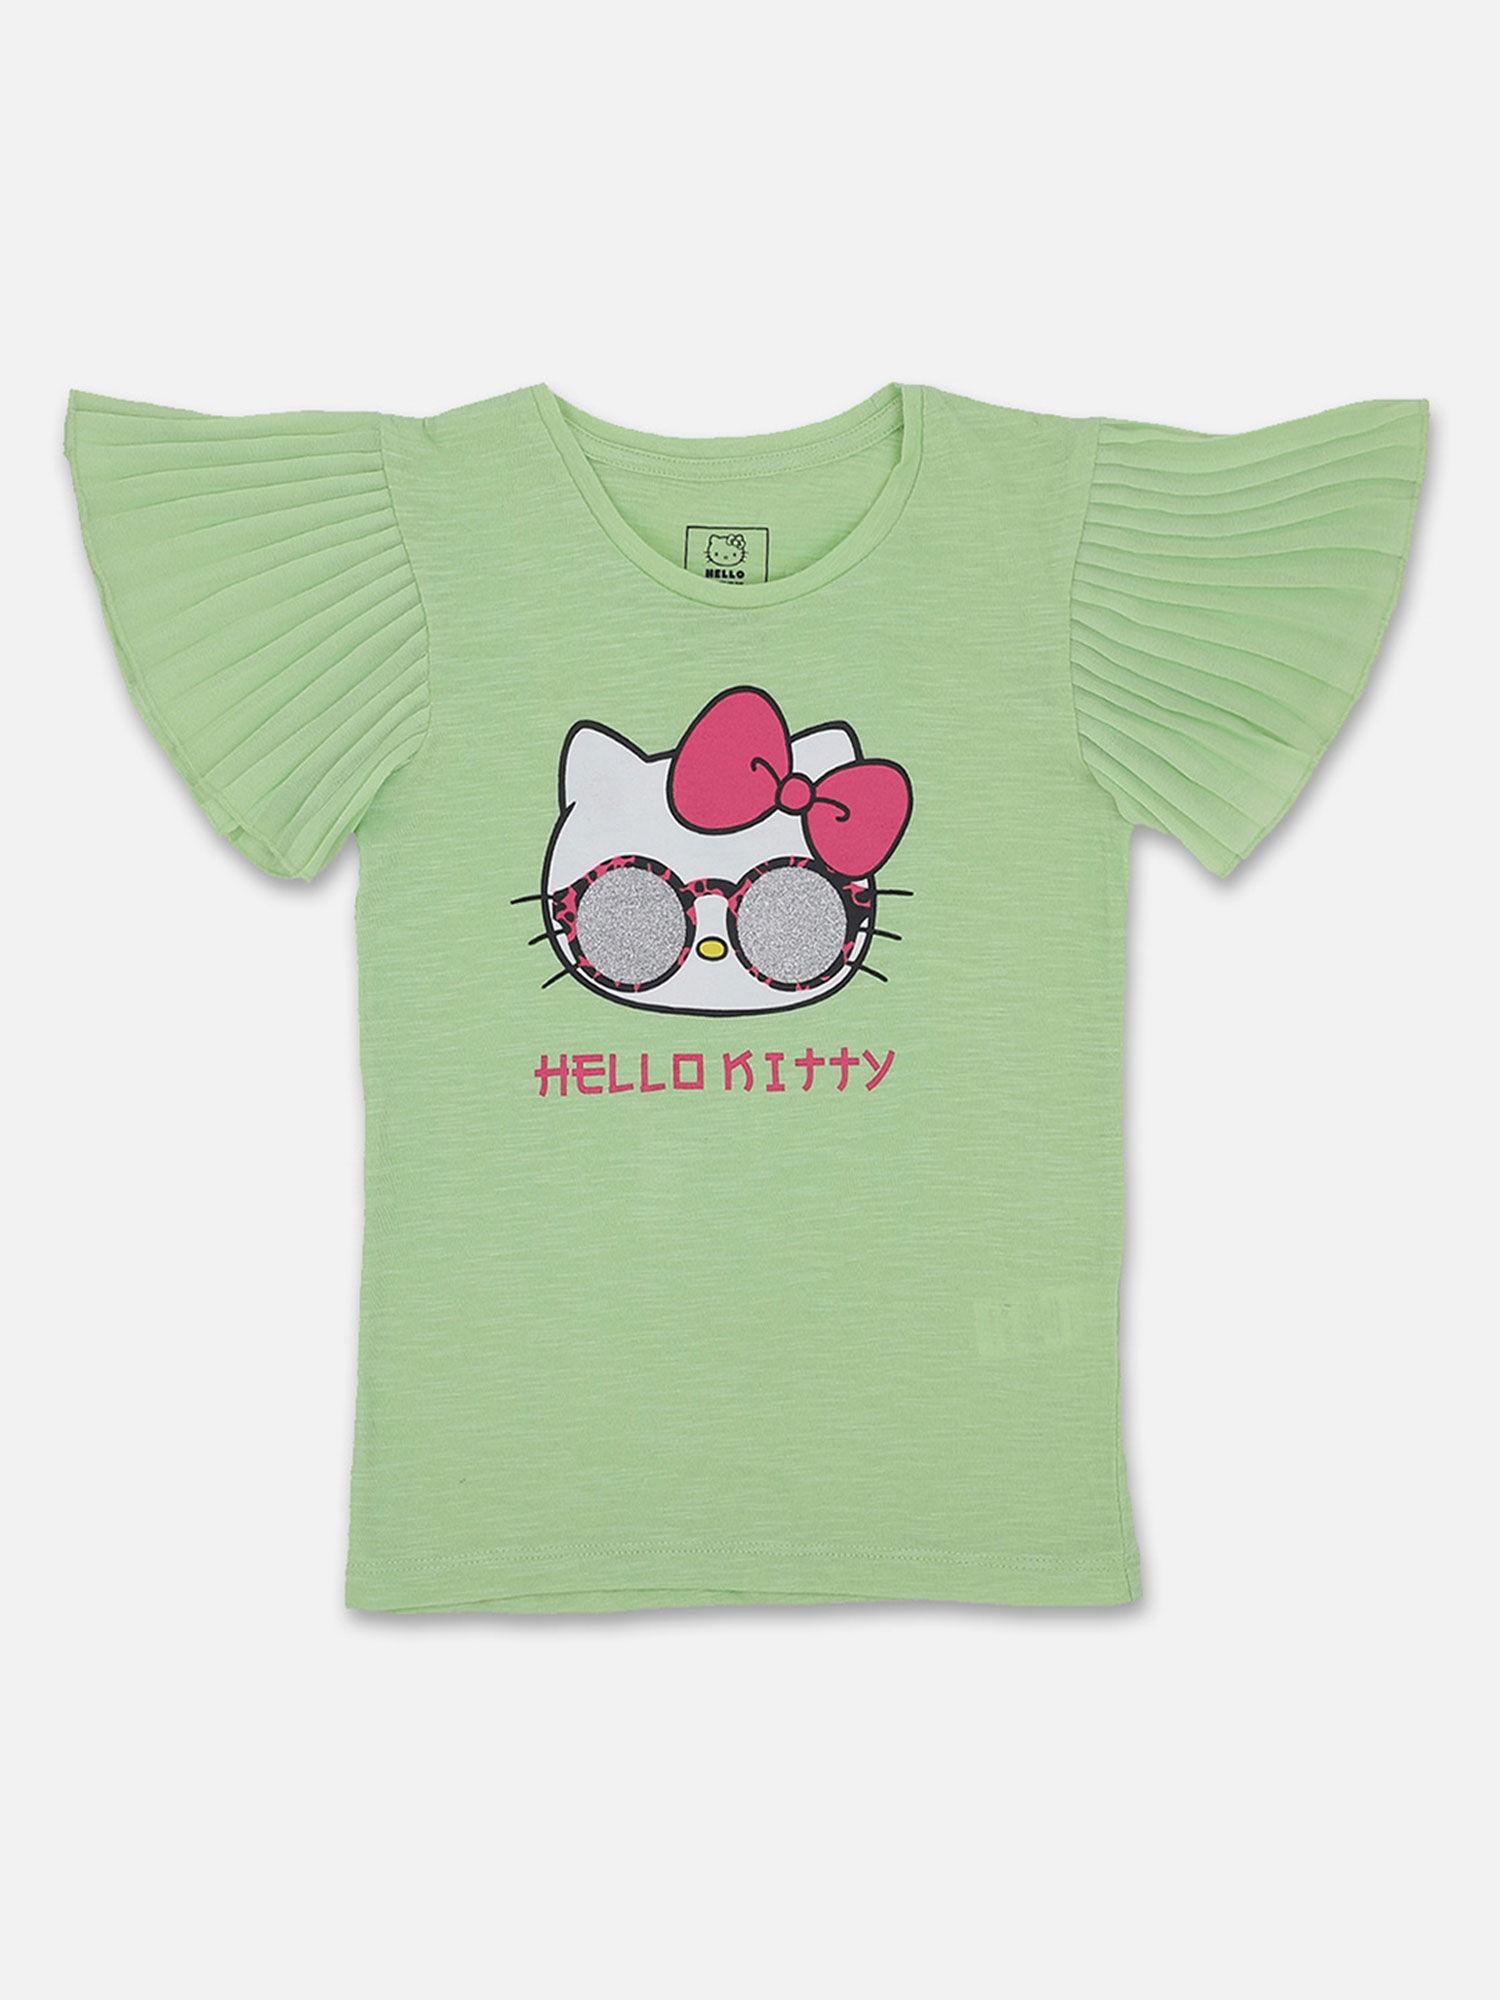 hello kitty featured t-shirt for girls